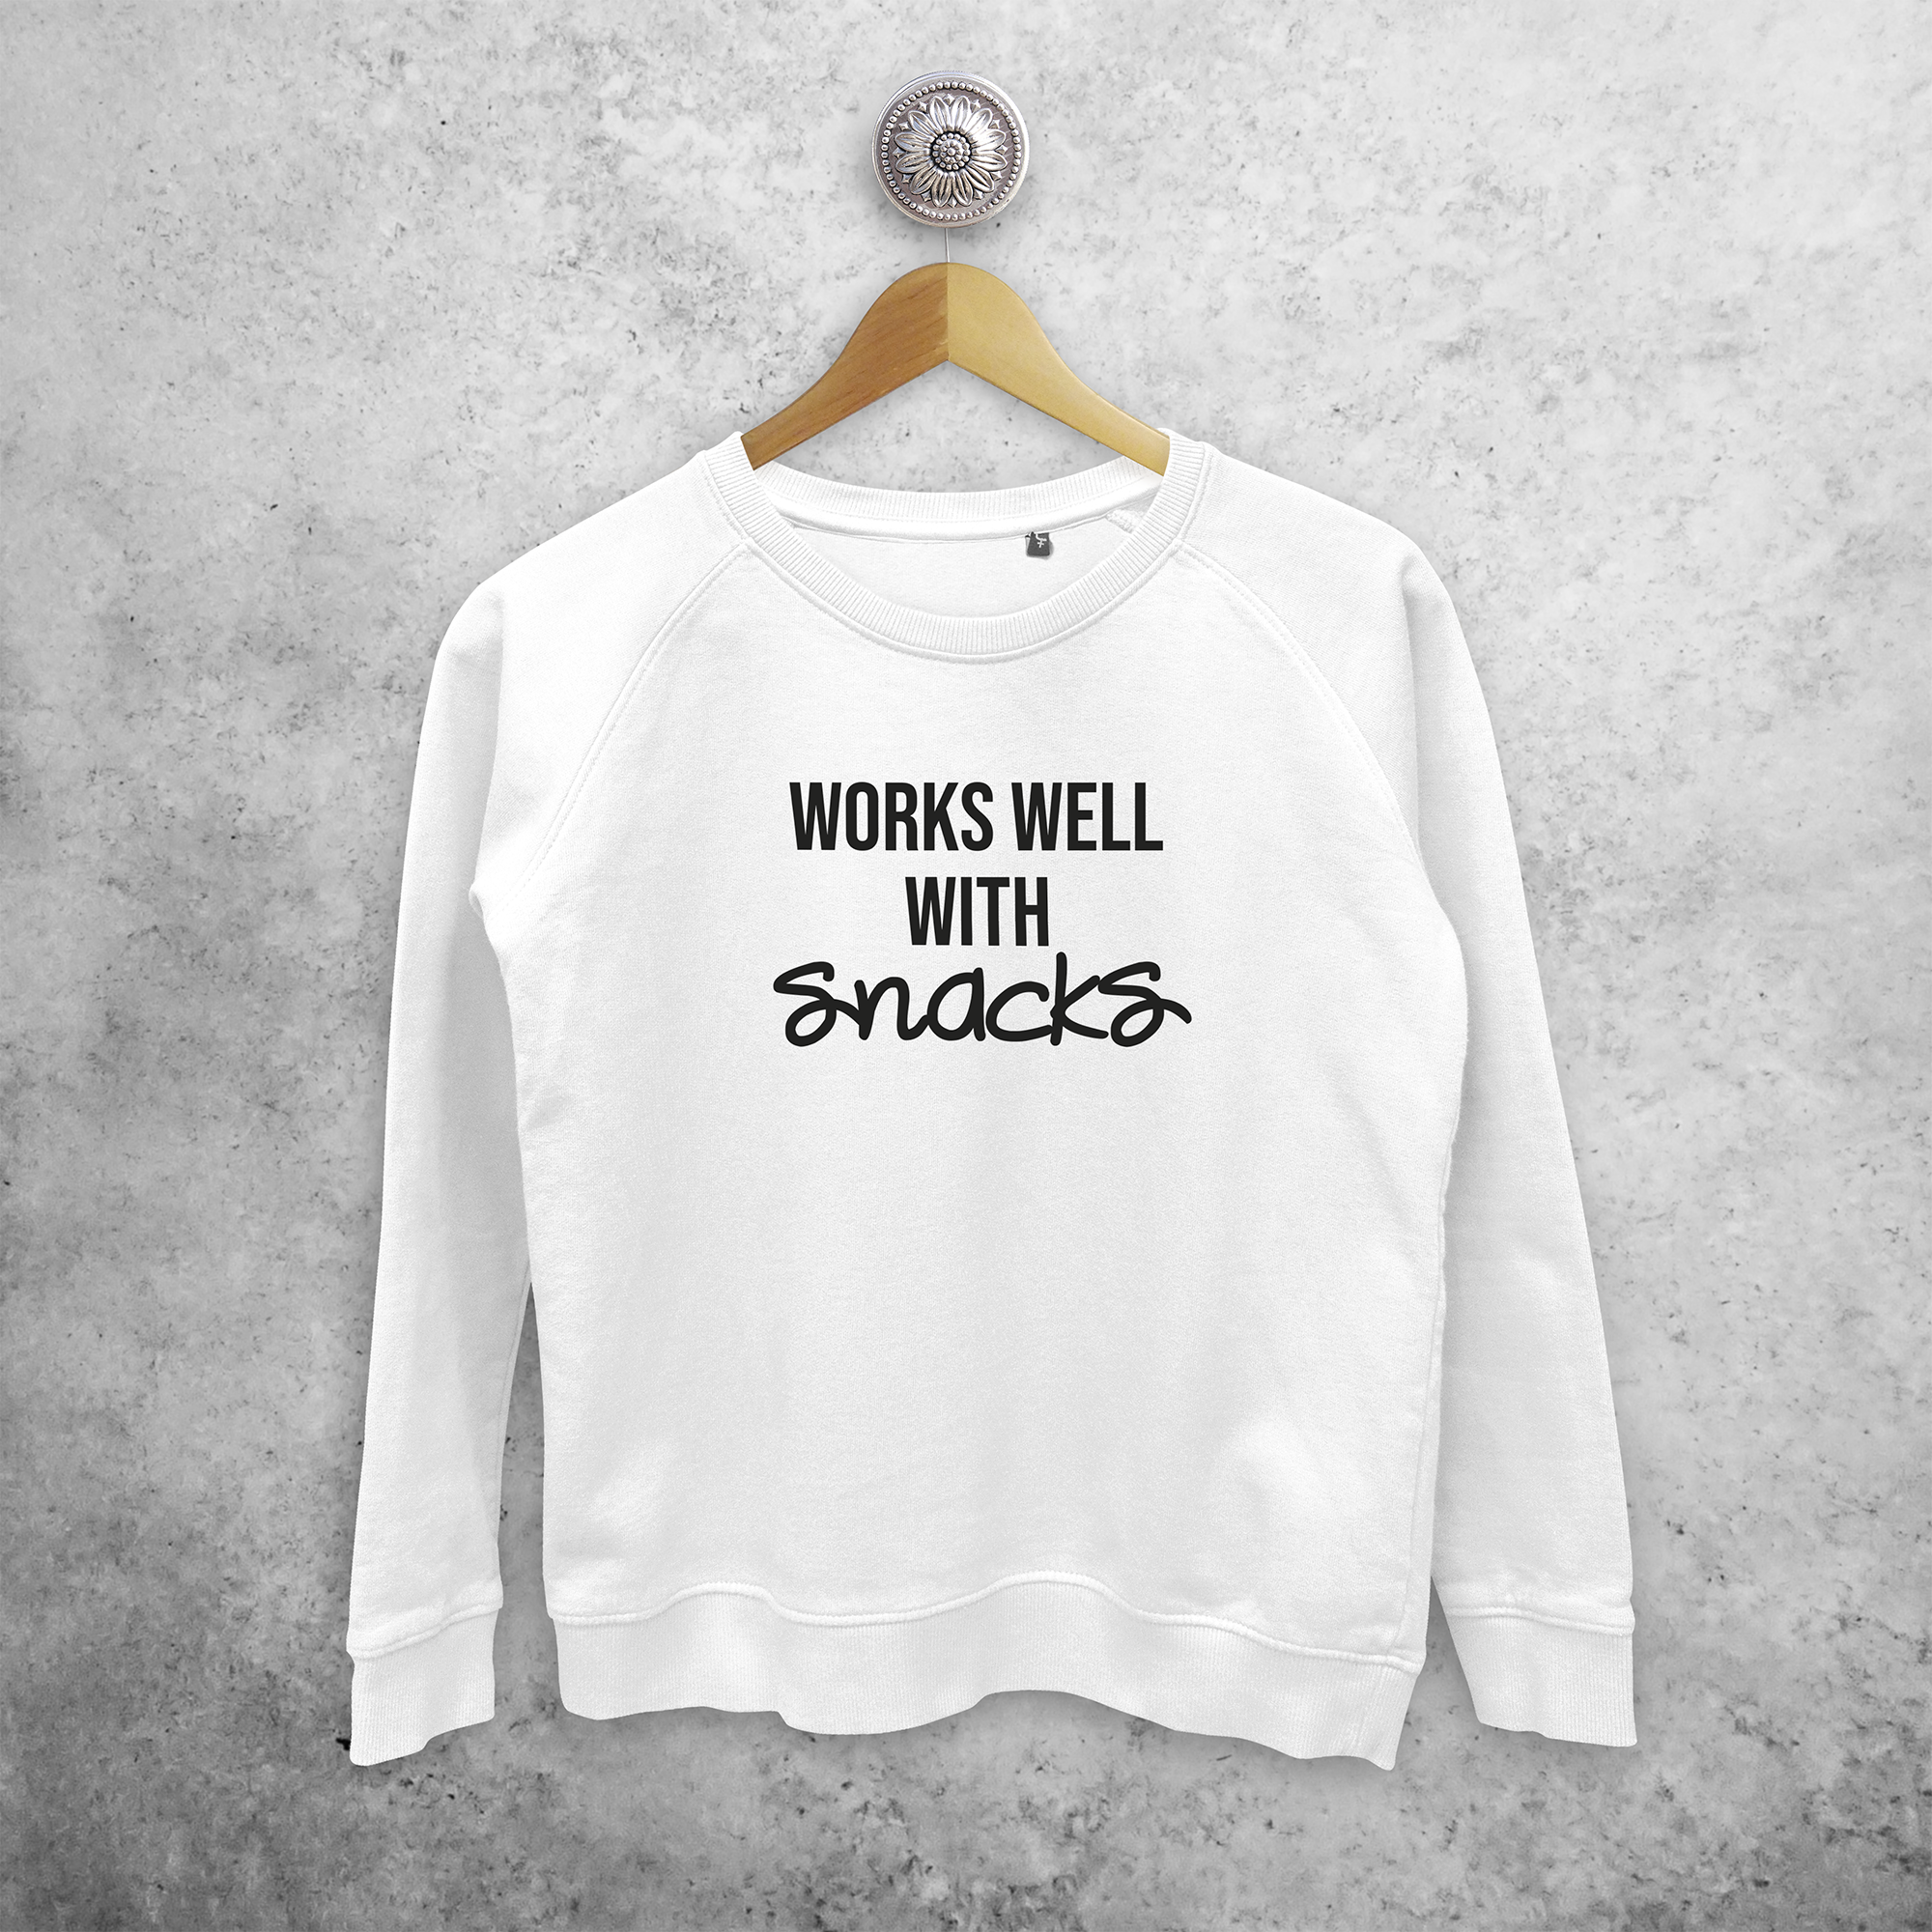 'Works well with snacks' sweater